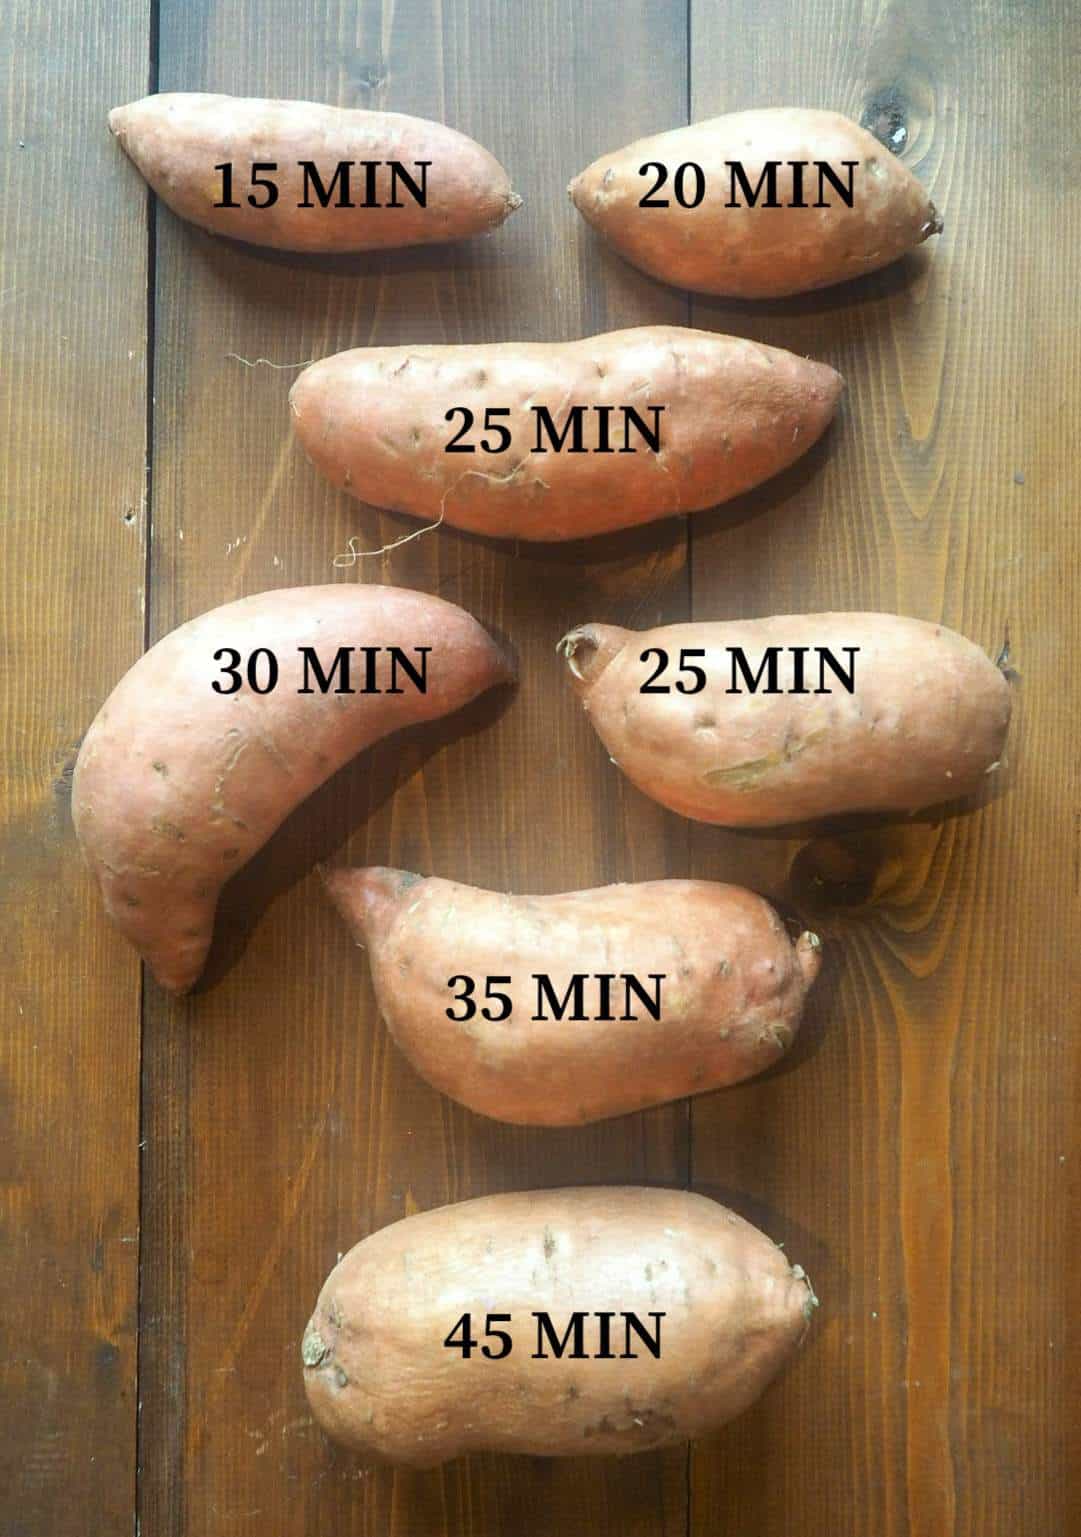 A graphic of sweet potatoes labeled with times, showing how long to cook them in an Instant Pot.